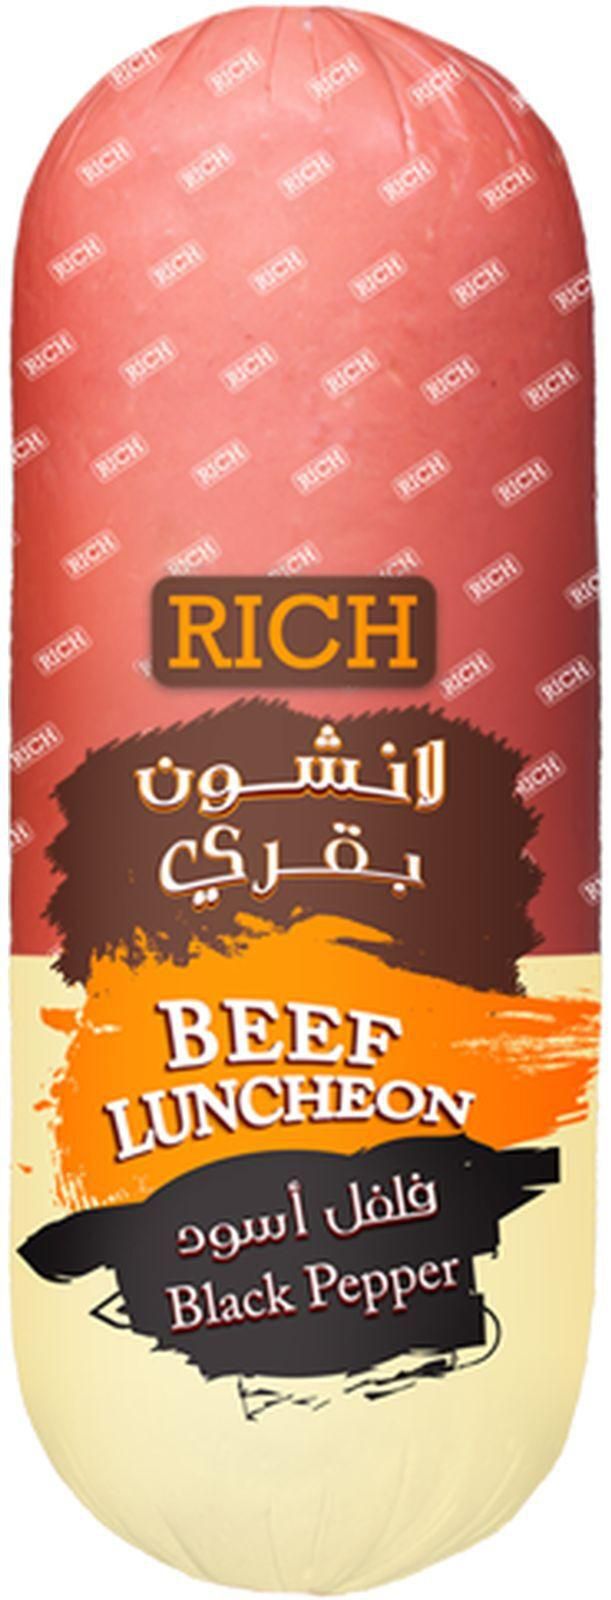 Rich Beef Luncheon With Black Pepper